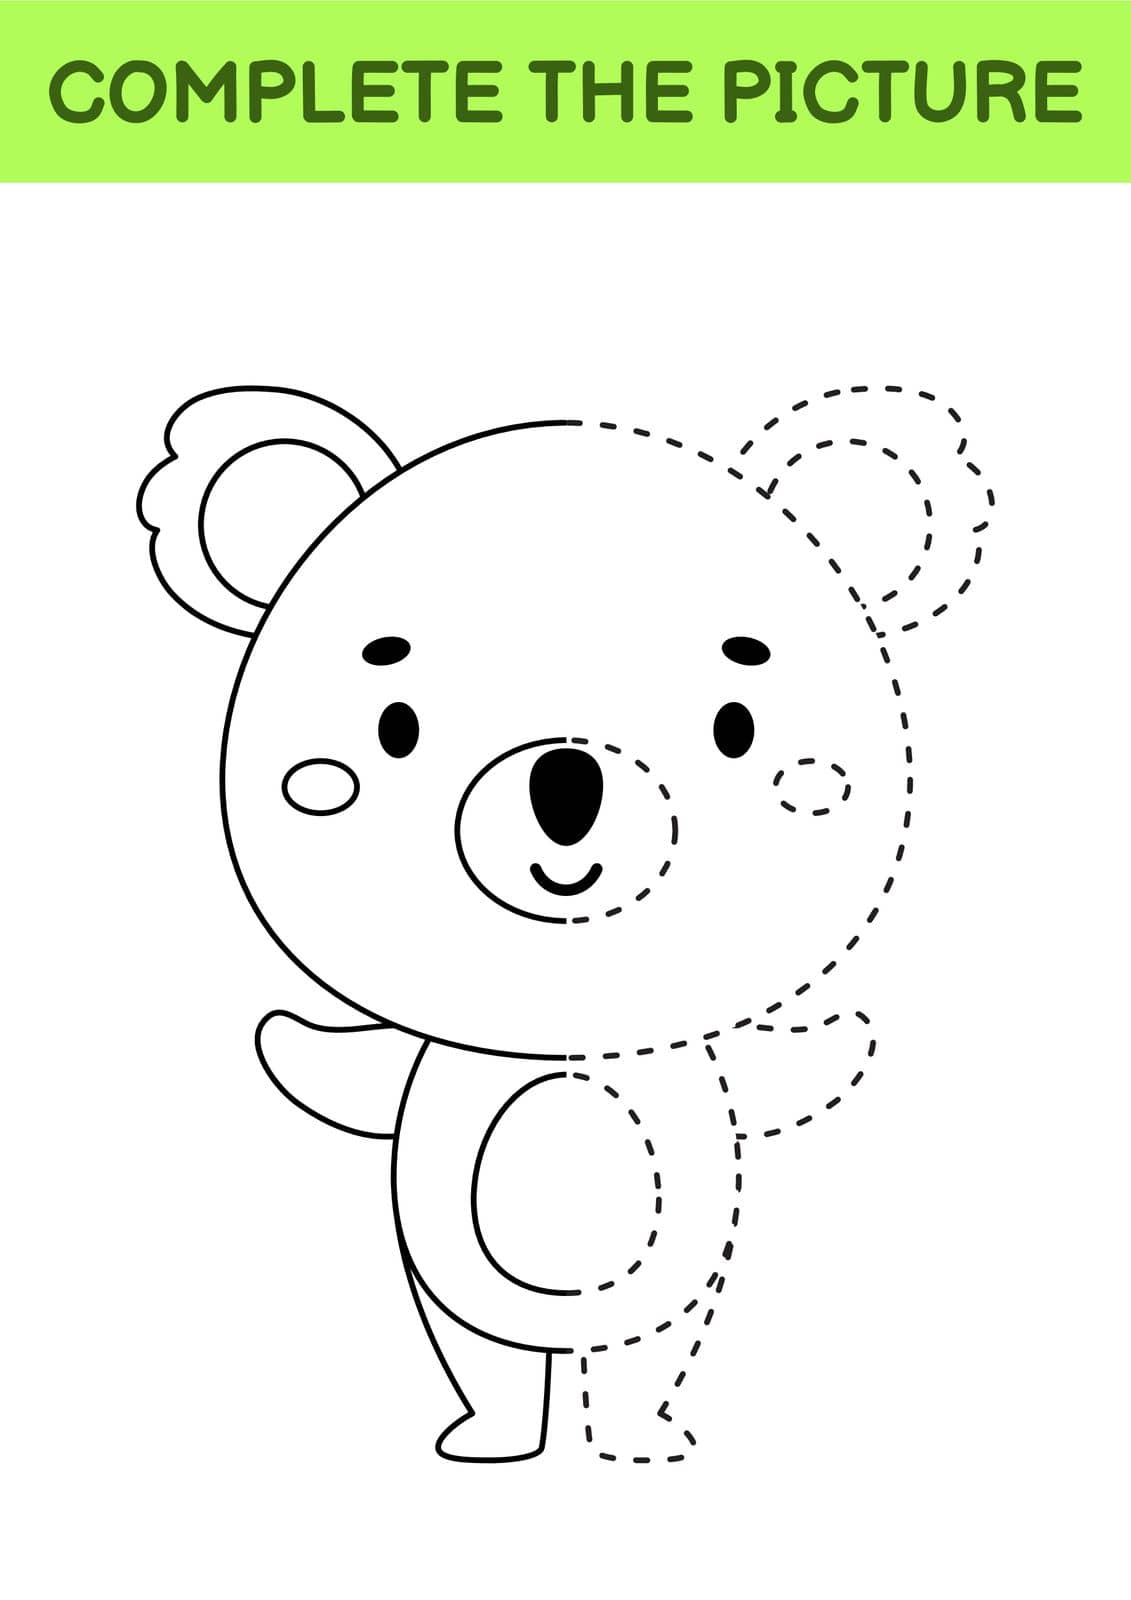 Complete drawn picture of cute koala. Coloring book. Dot copy game. Handwriting practice, drawing skills training. Education developing printable worksheet. Activity page. Vector illustration